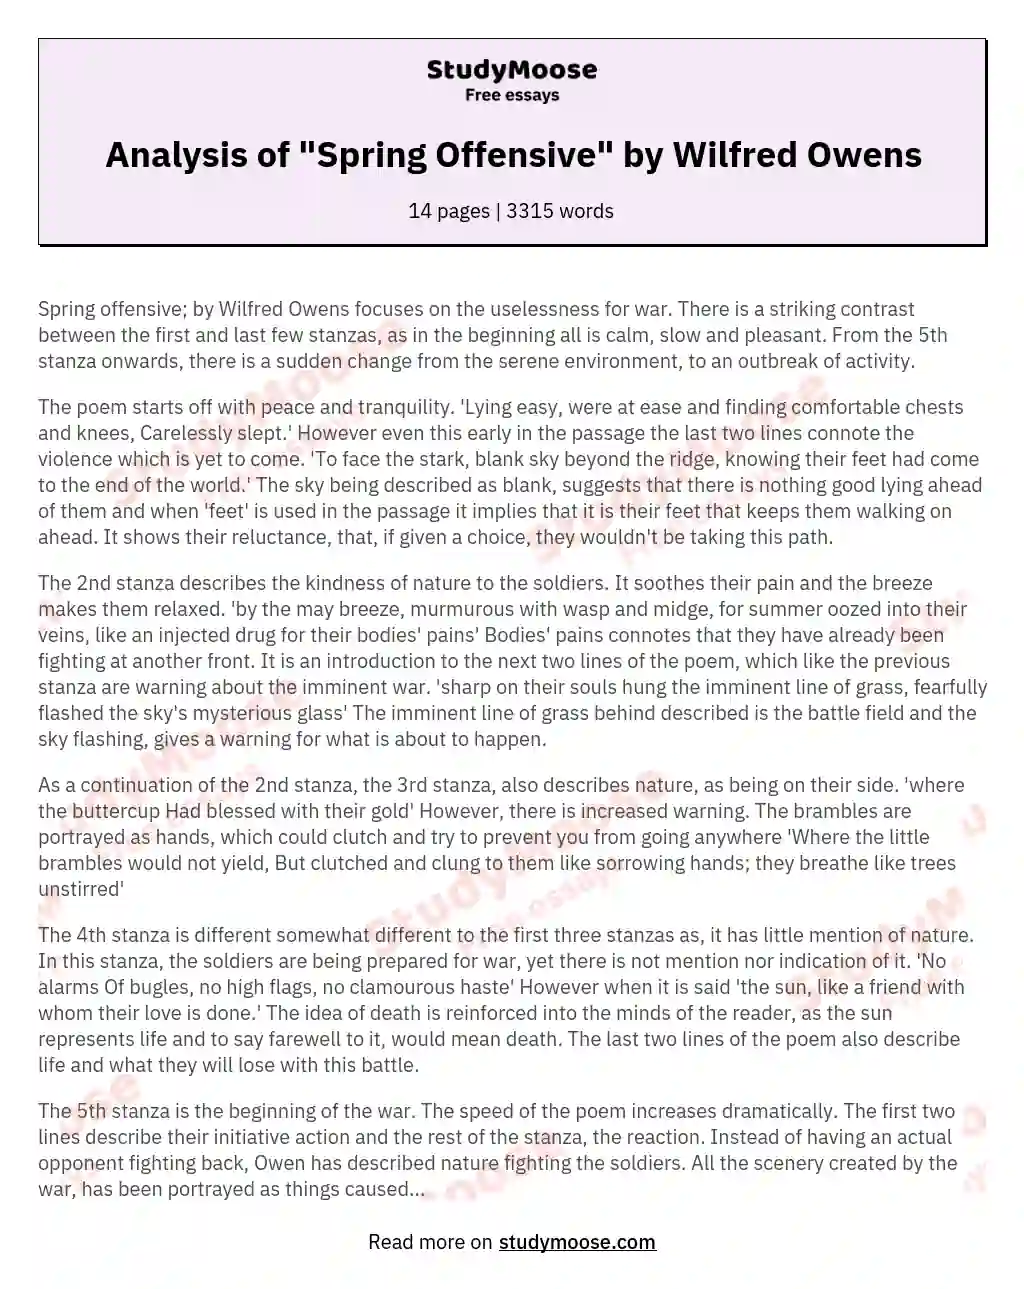 Analysis of "Spring Offensive" by Wilfred Owens essay